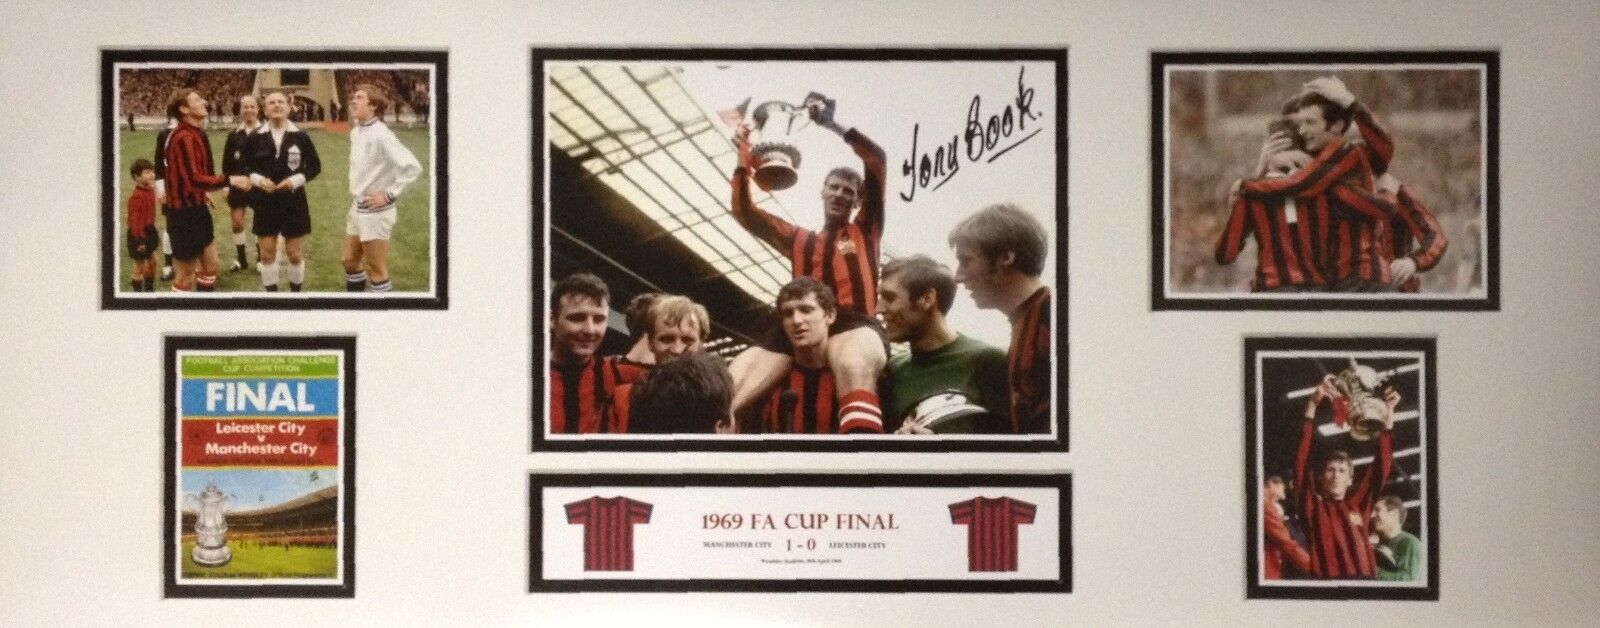 TONY BOOK SIGNED MANCHESTER CITY 30x12 Photo Poster painting 1969 FA CUP FINAL COA PROOF MCFC